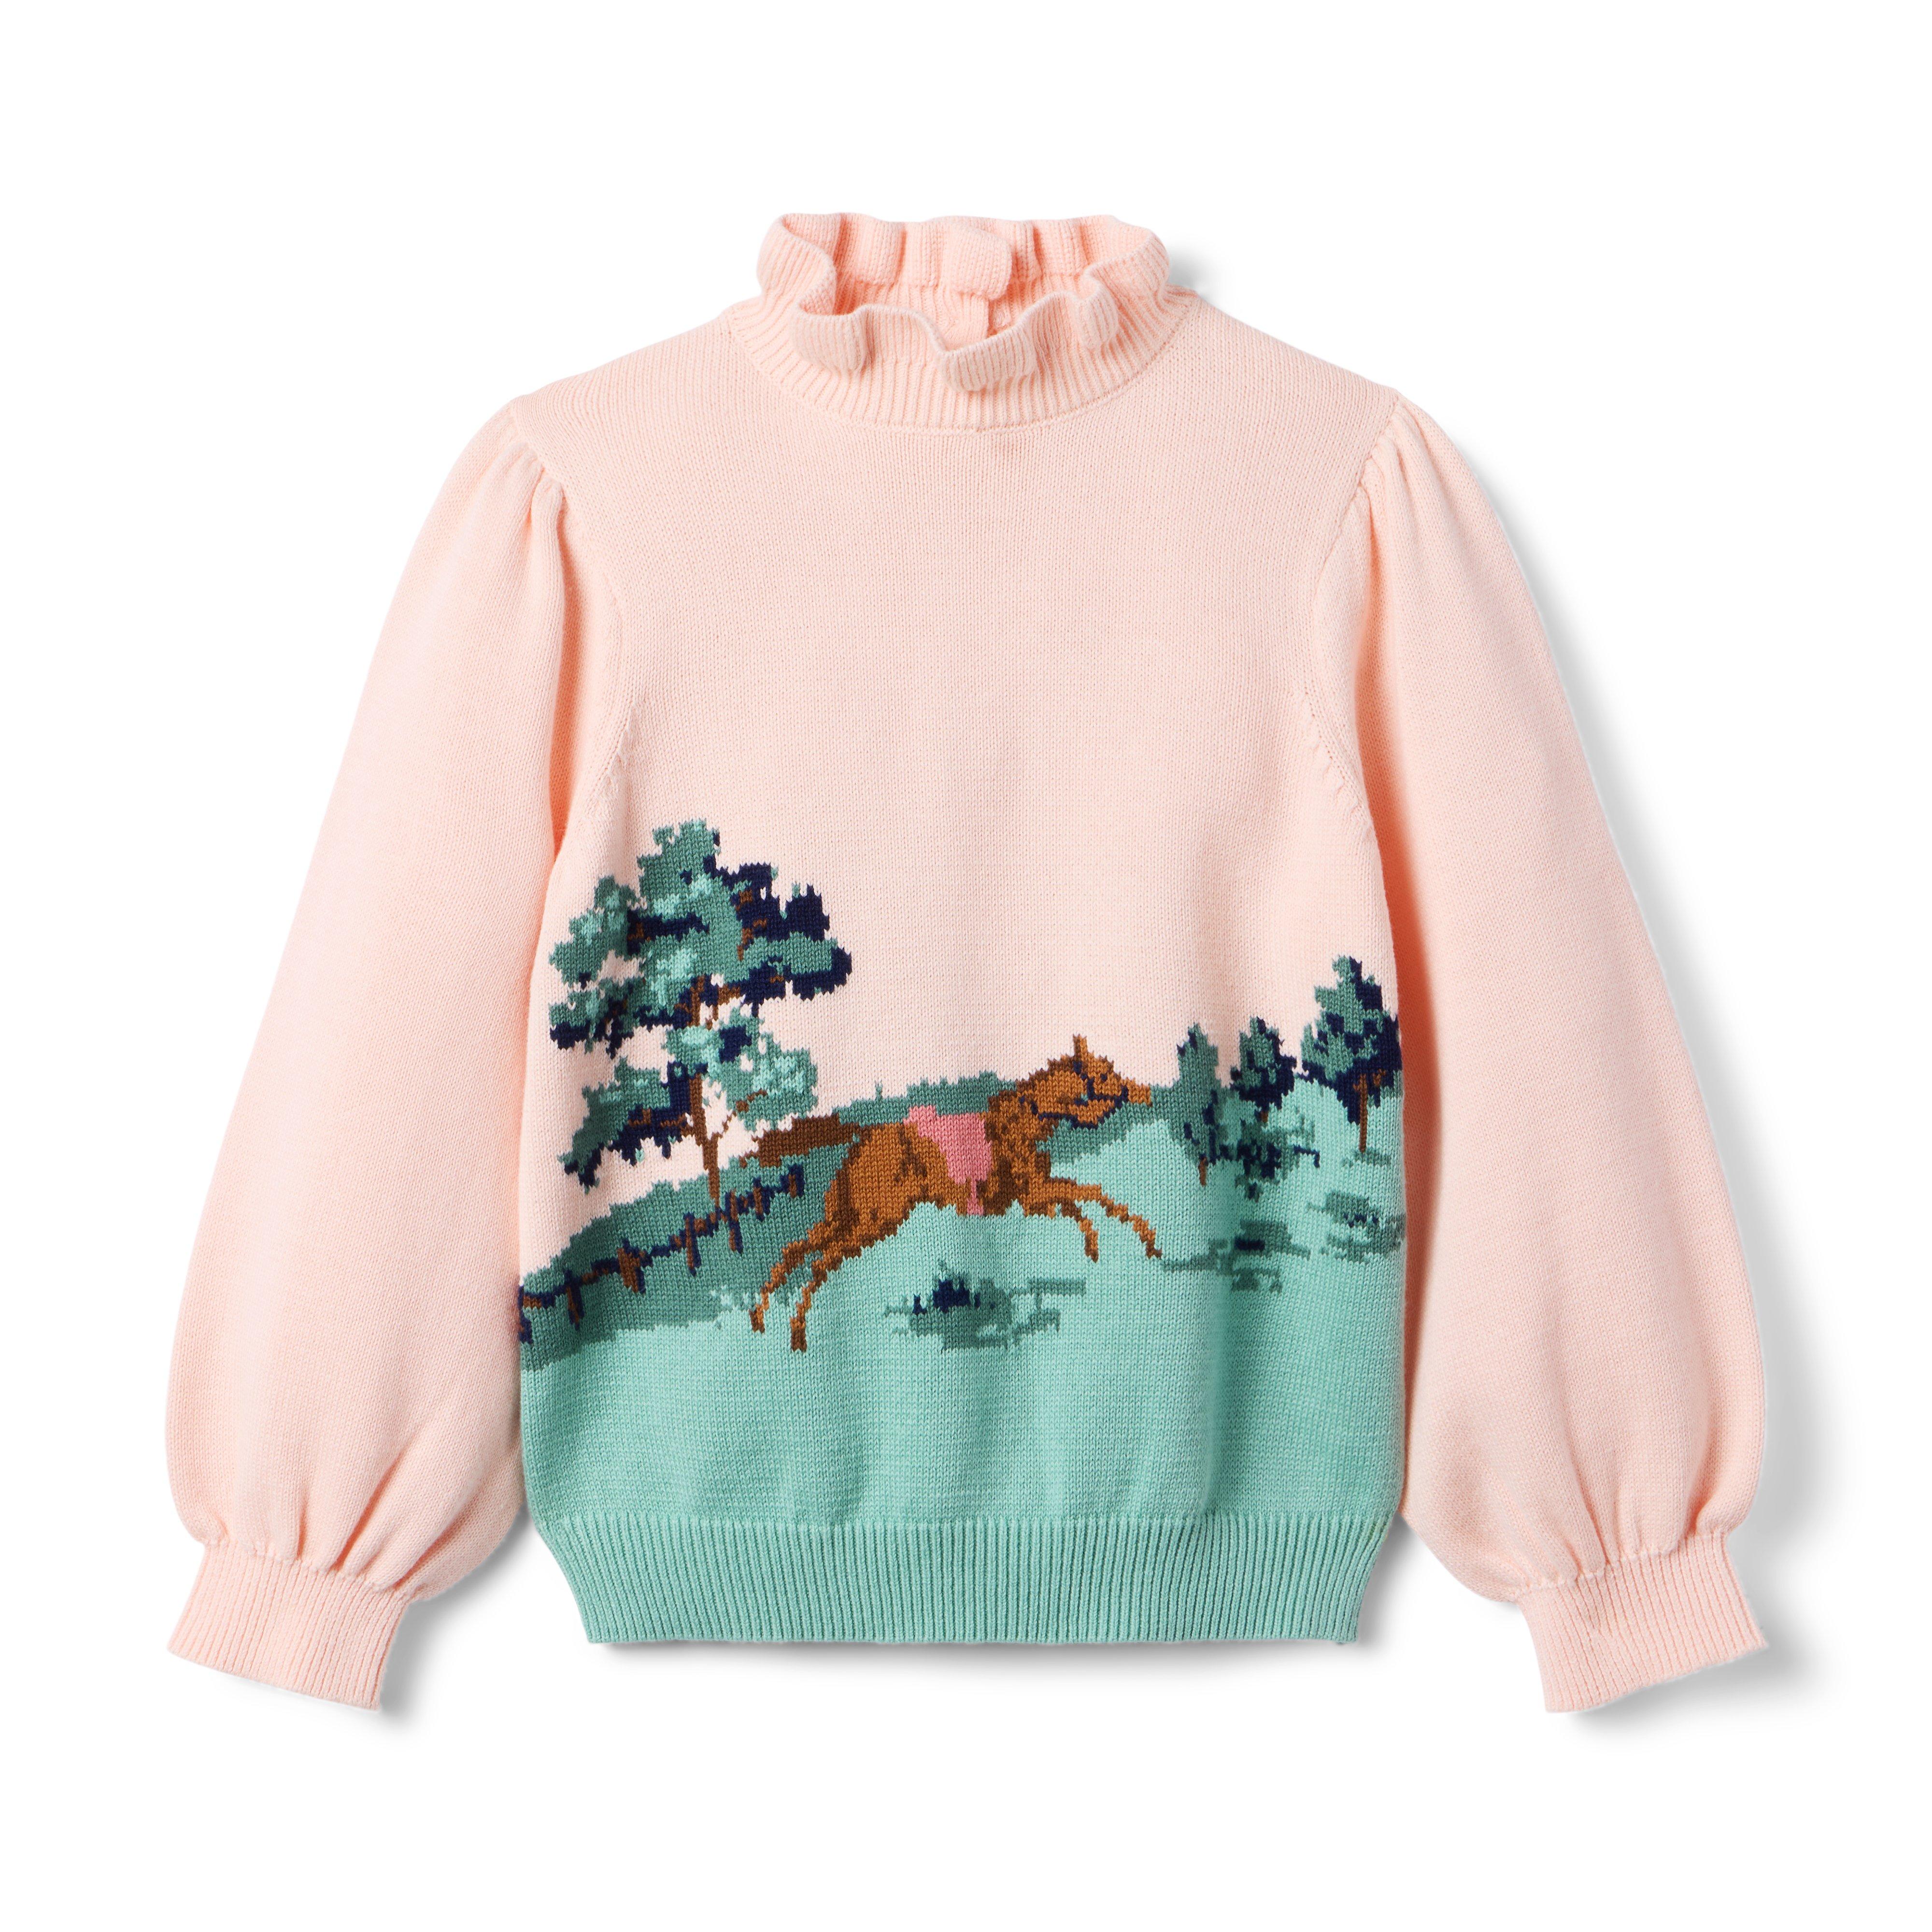 The Equestrian Sweater